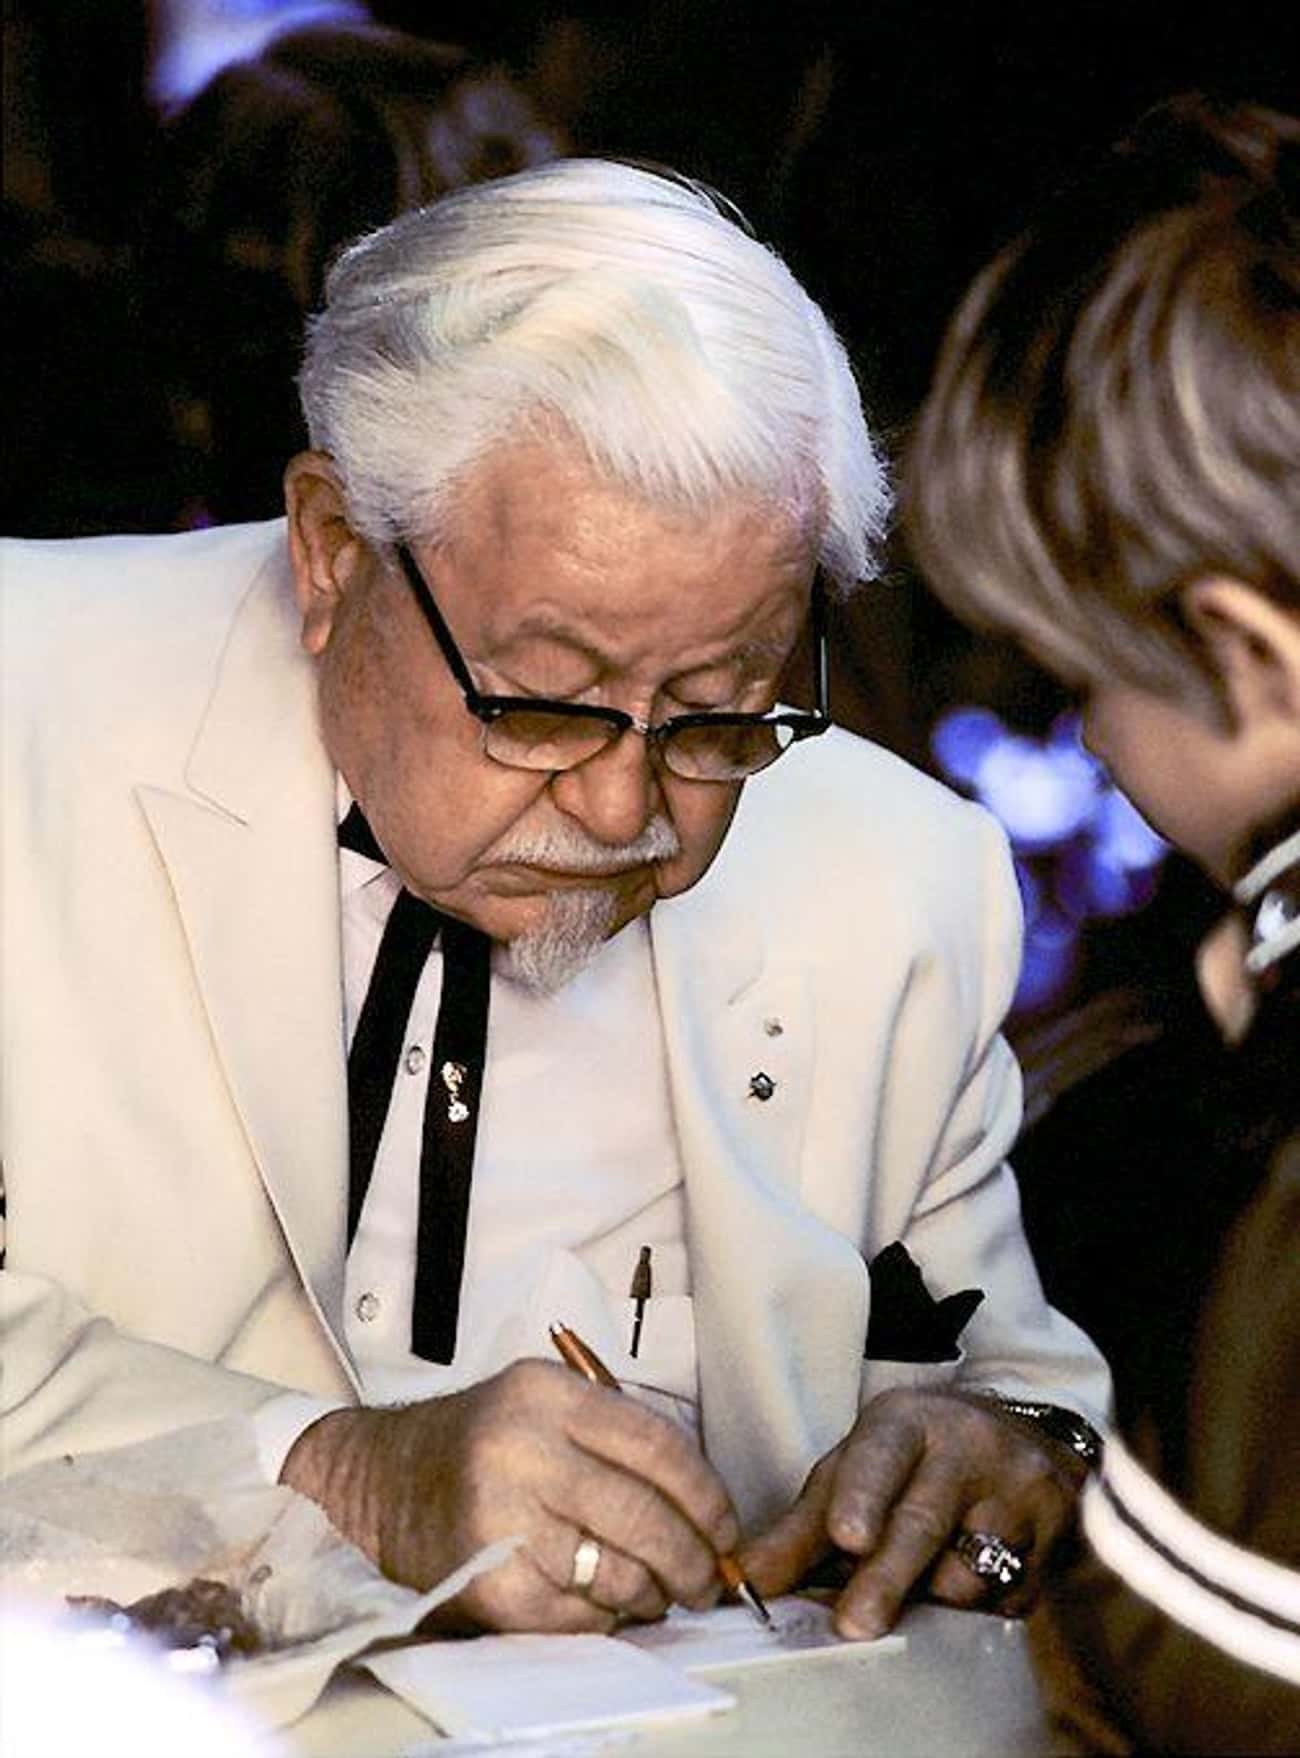 Kentucky Fried Chicken Founder Colonel Sanders Once Injured A Business Rival In A Shoot-Out
